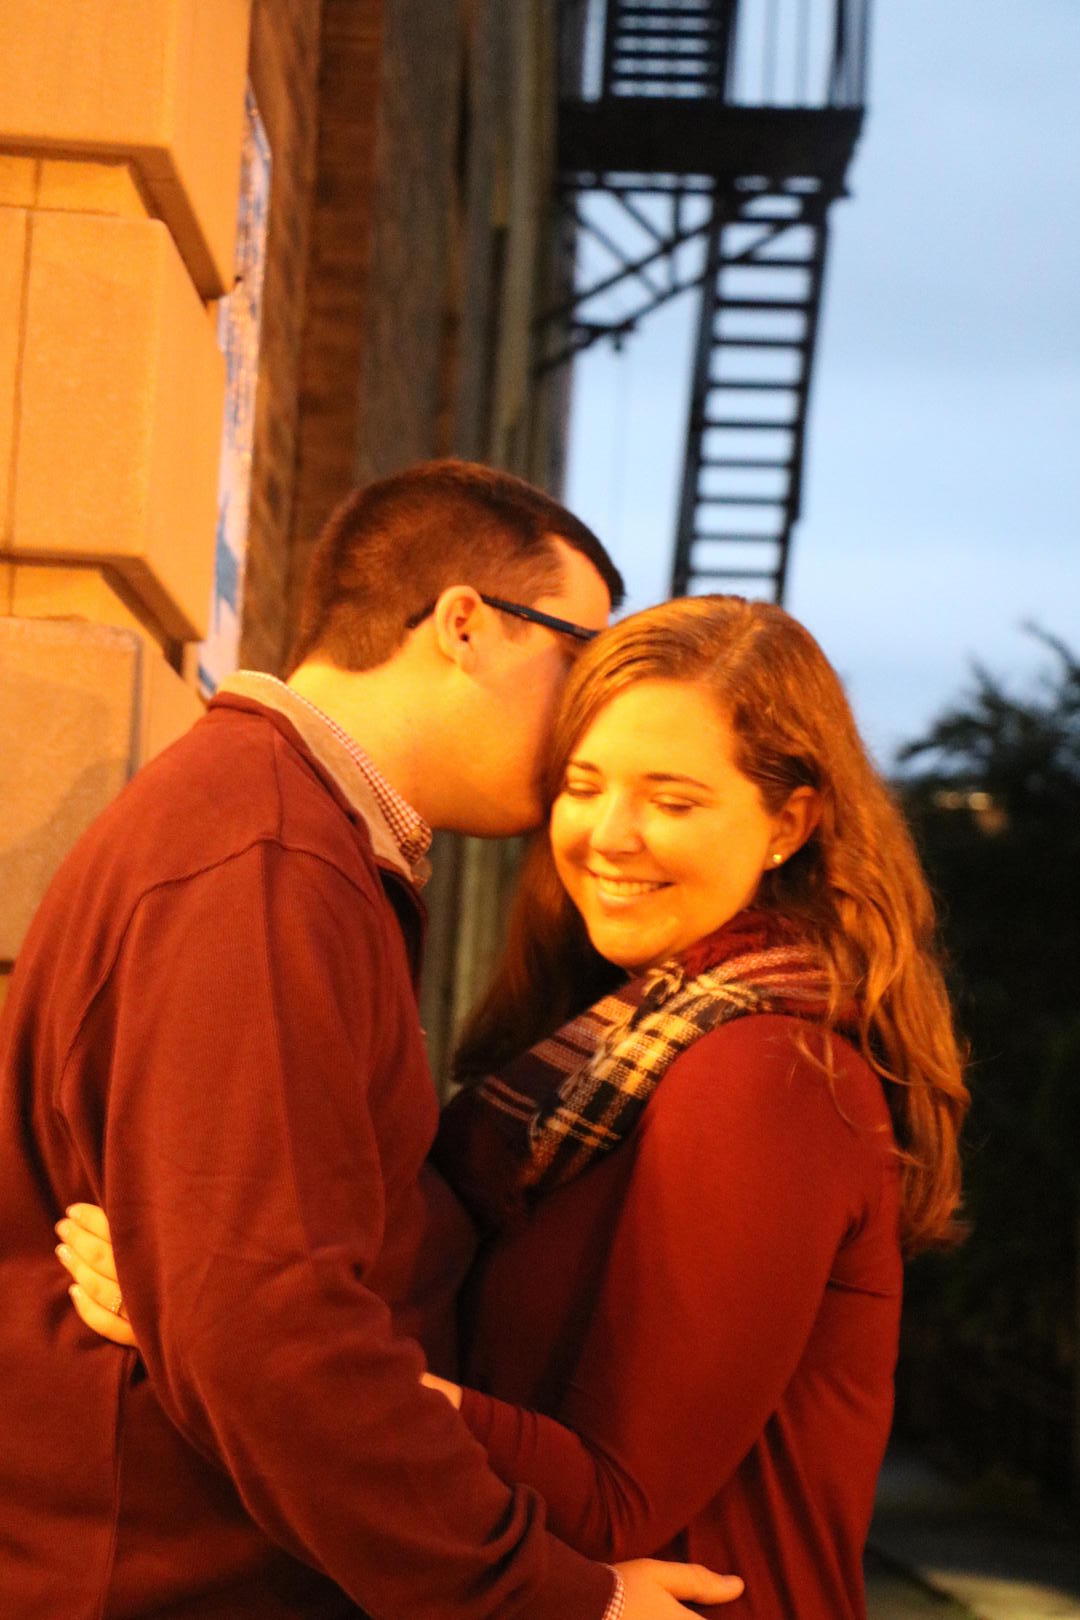 Sean kisses Haleigh's cheek on a street corner of Gay Street in downtown Knoxville, Tennessee
